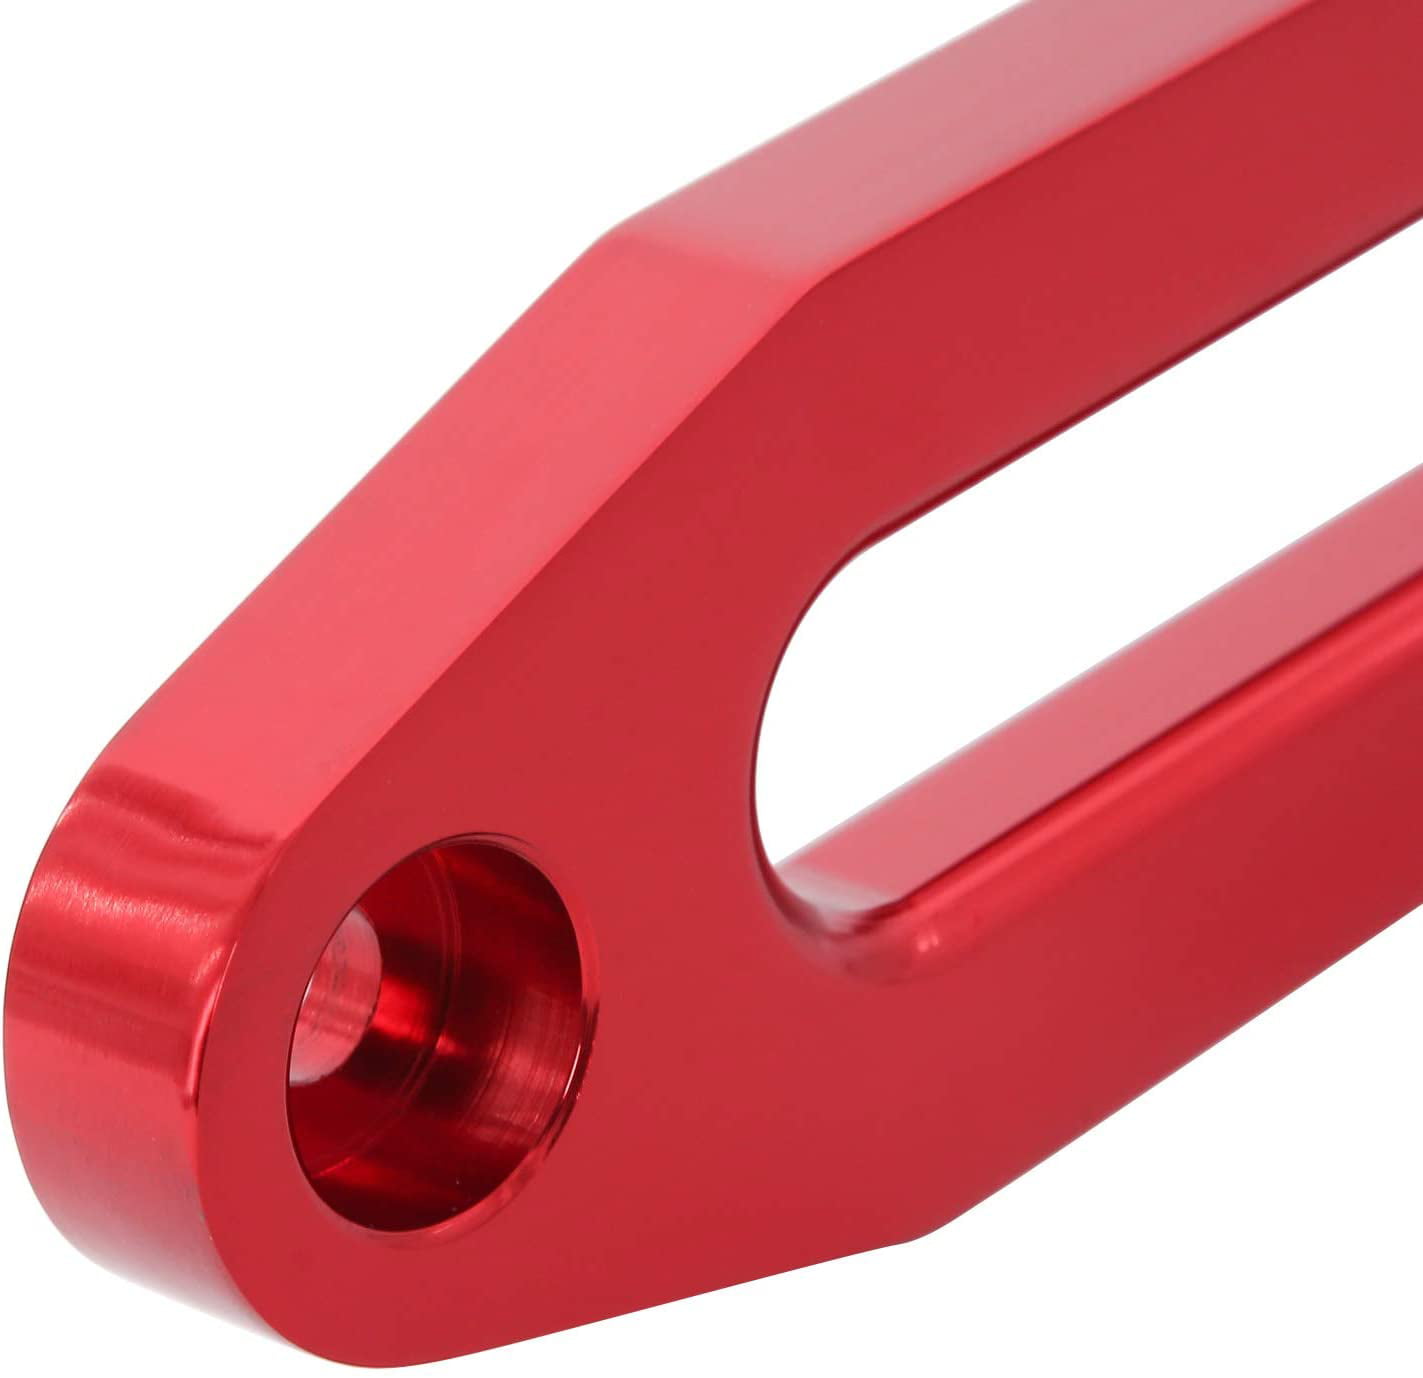 Red 10 Mount Billet Aluminum Hawse Fairlead for 8000-15000 LBS Synthetic Winch Rope 254mm 